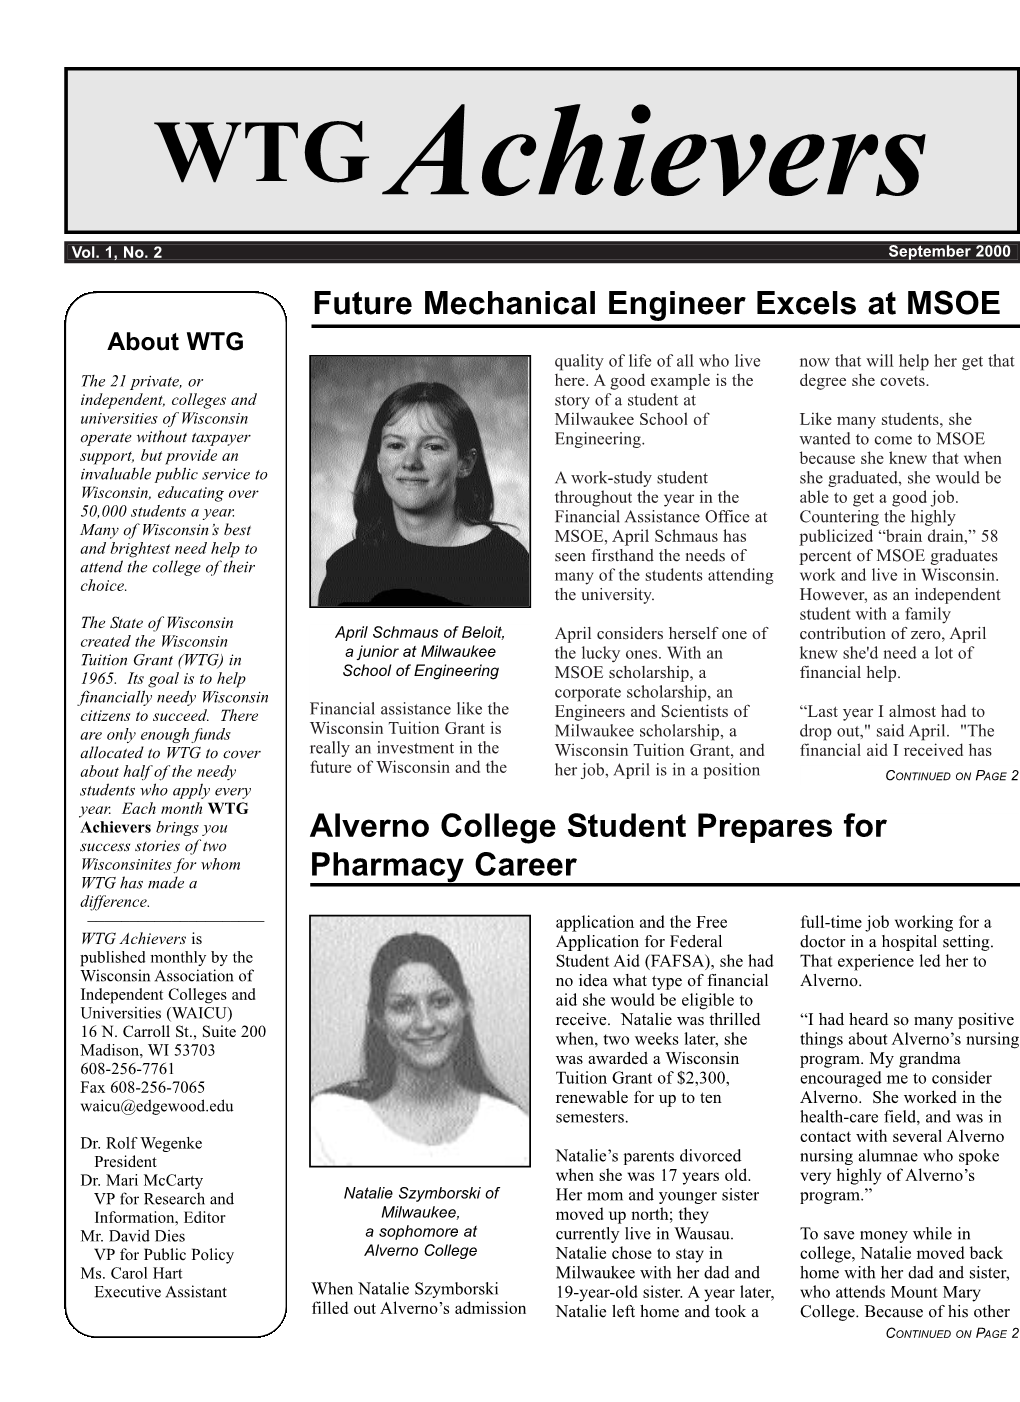 Future Mechanical Engineer Excels at MSOE Alverno College Student